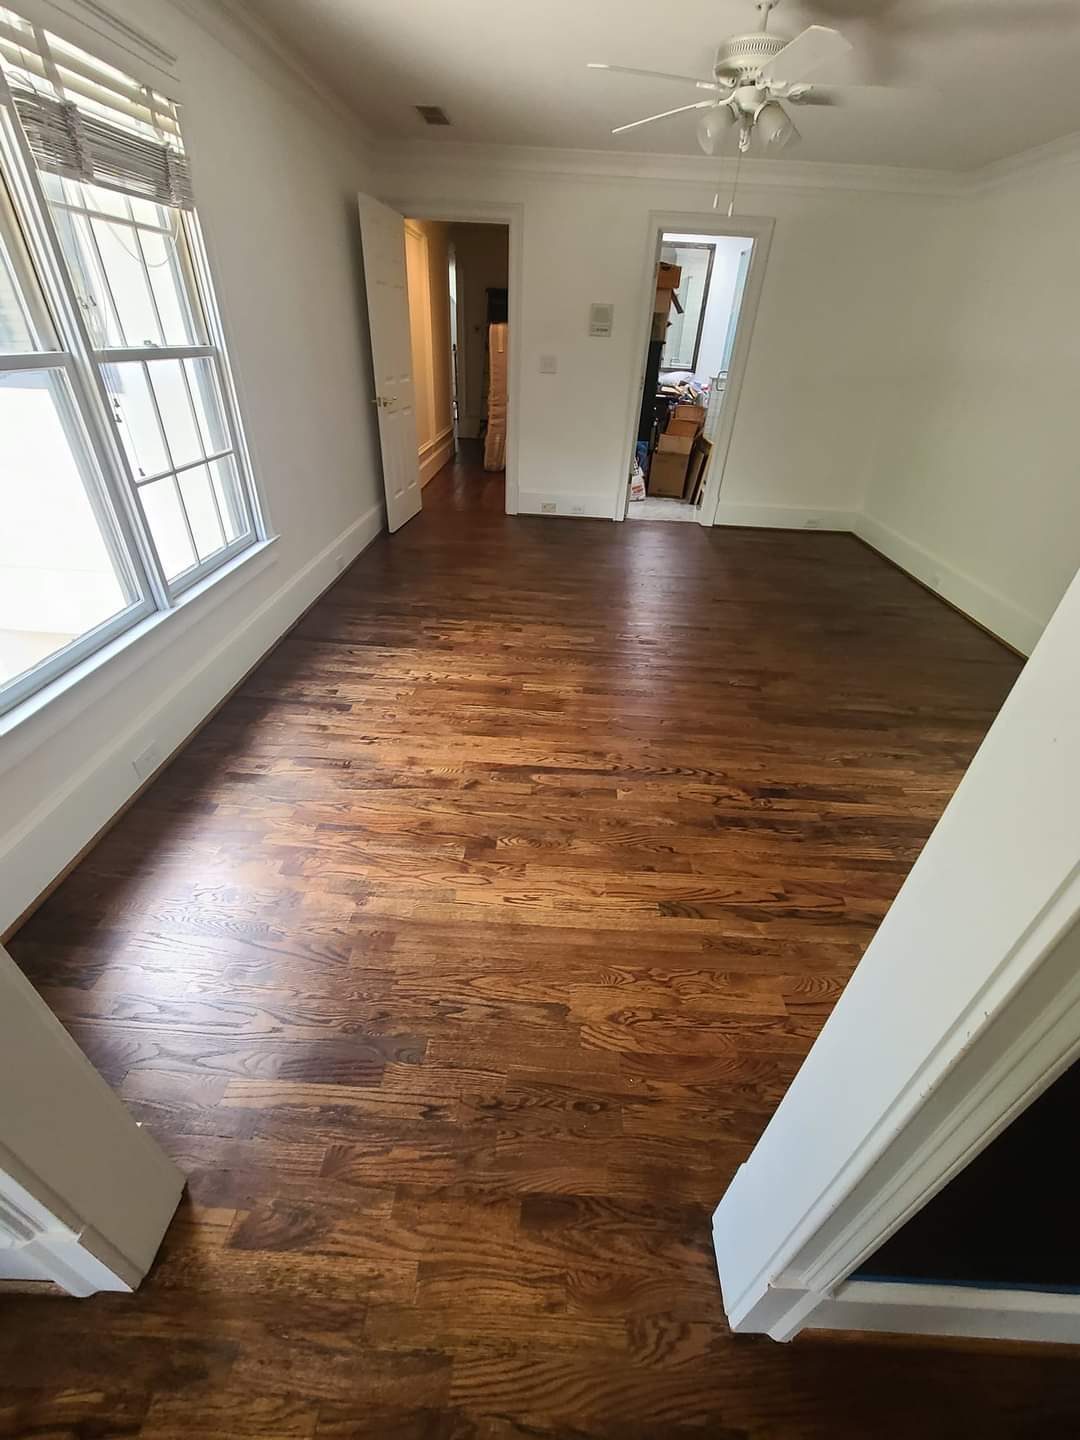 This old construction home has beautiful moldings and a gorgeous hardwood floor installation.